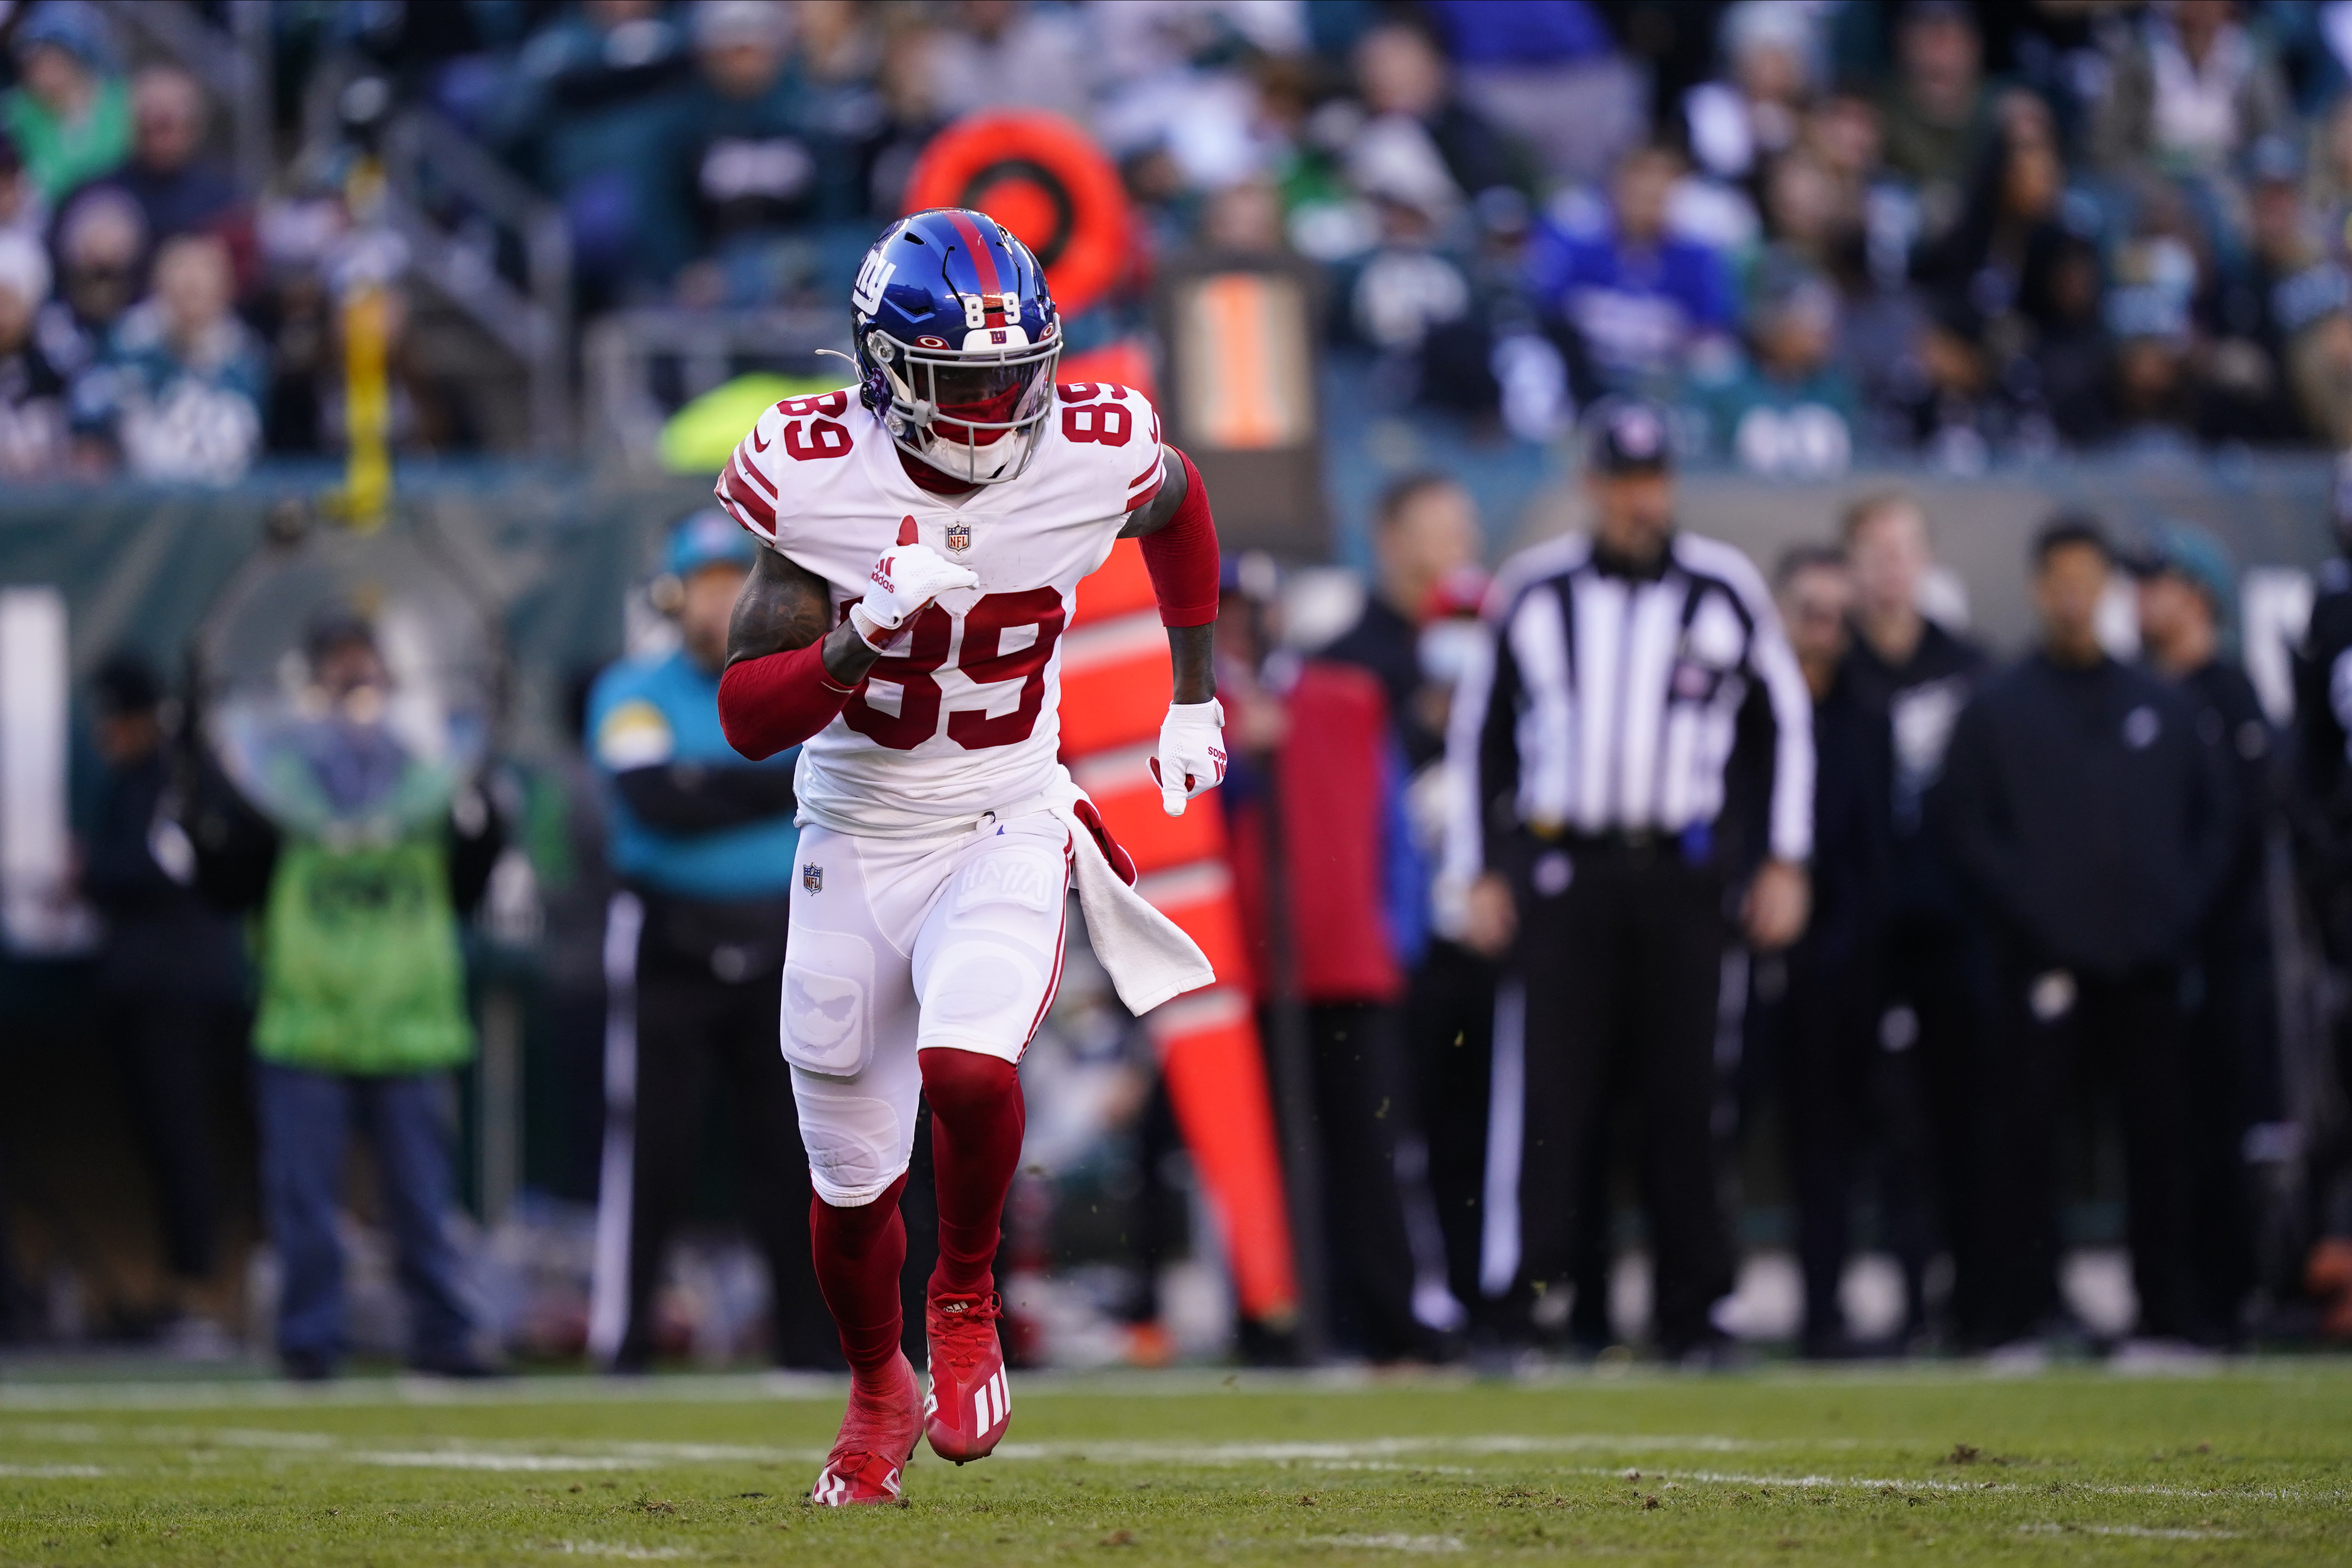 Giants’ Hypothetical Trade Packages for Kadarius Toney